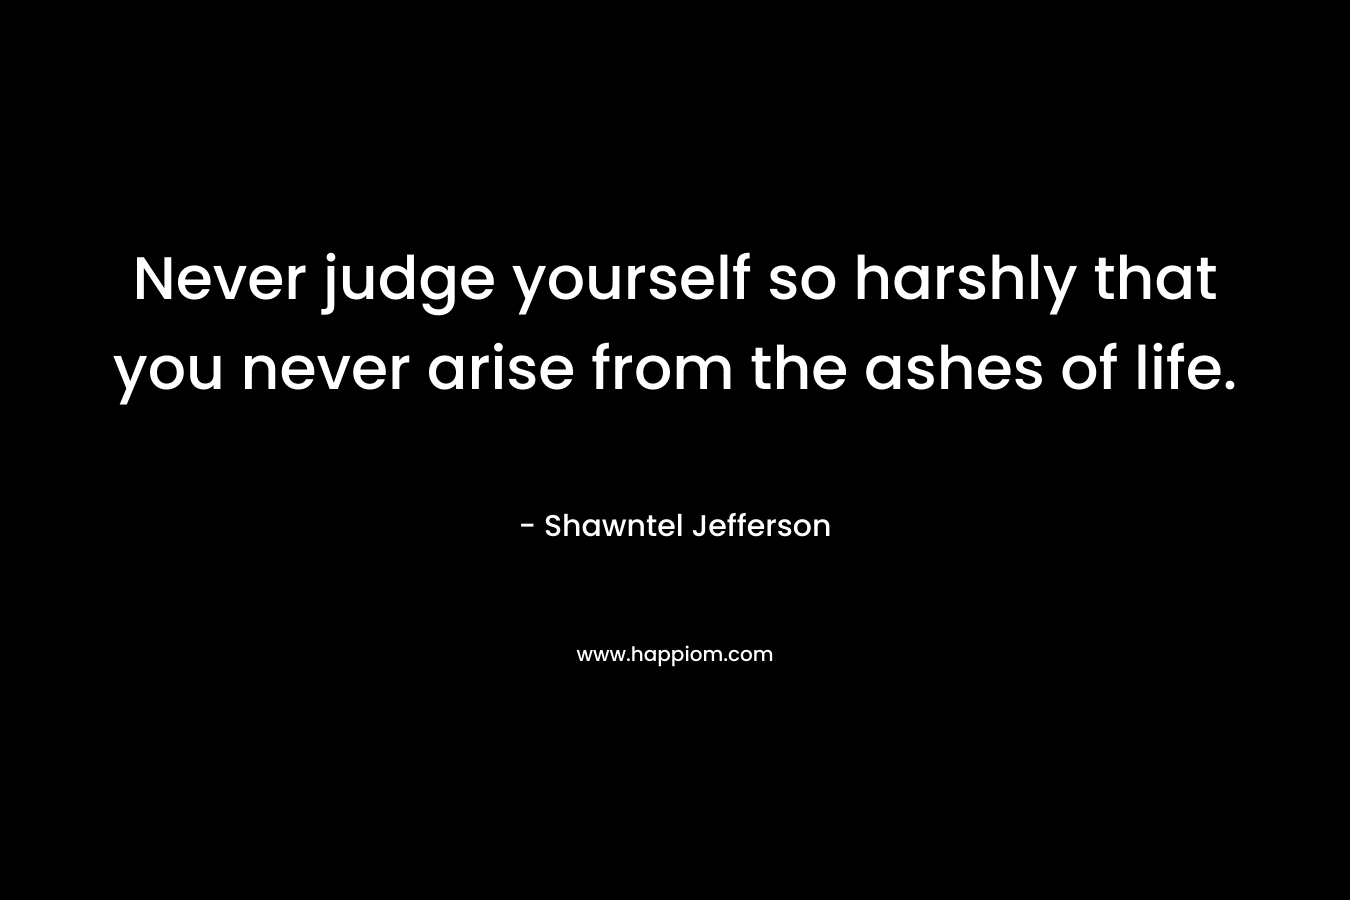 Never judge yourself so harshly that you never arise from the ashes of life. – Shawntel Jefferson